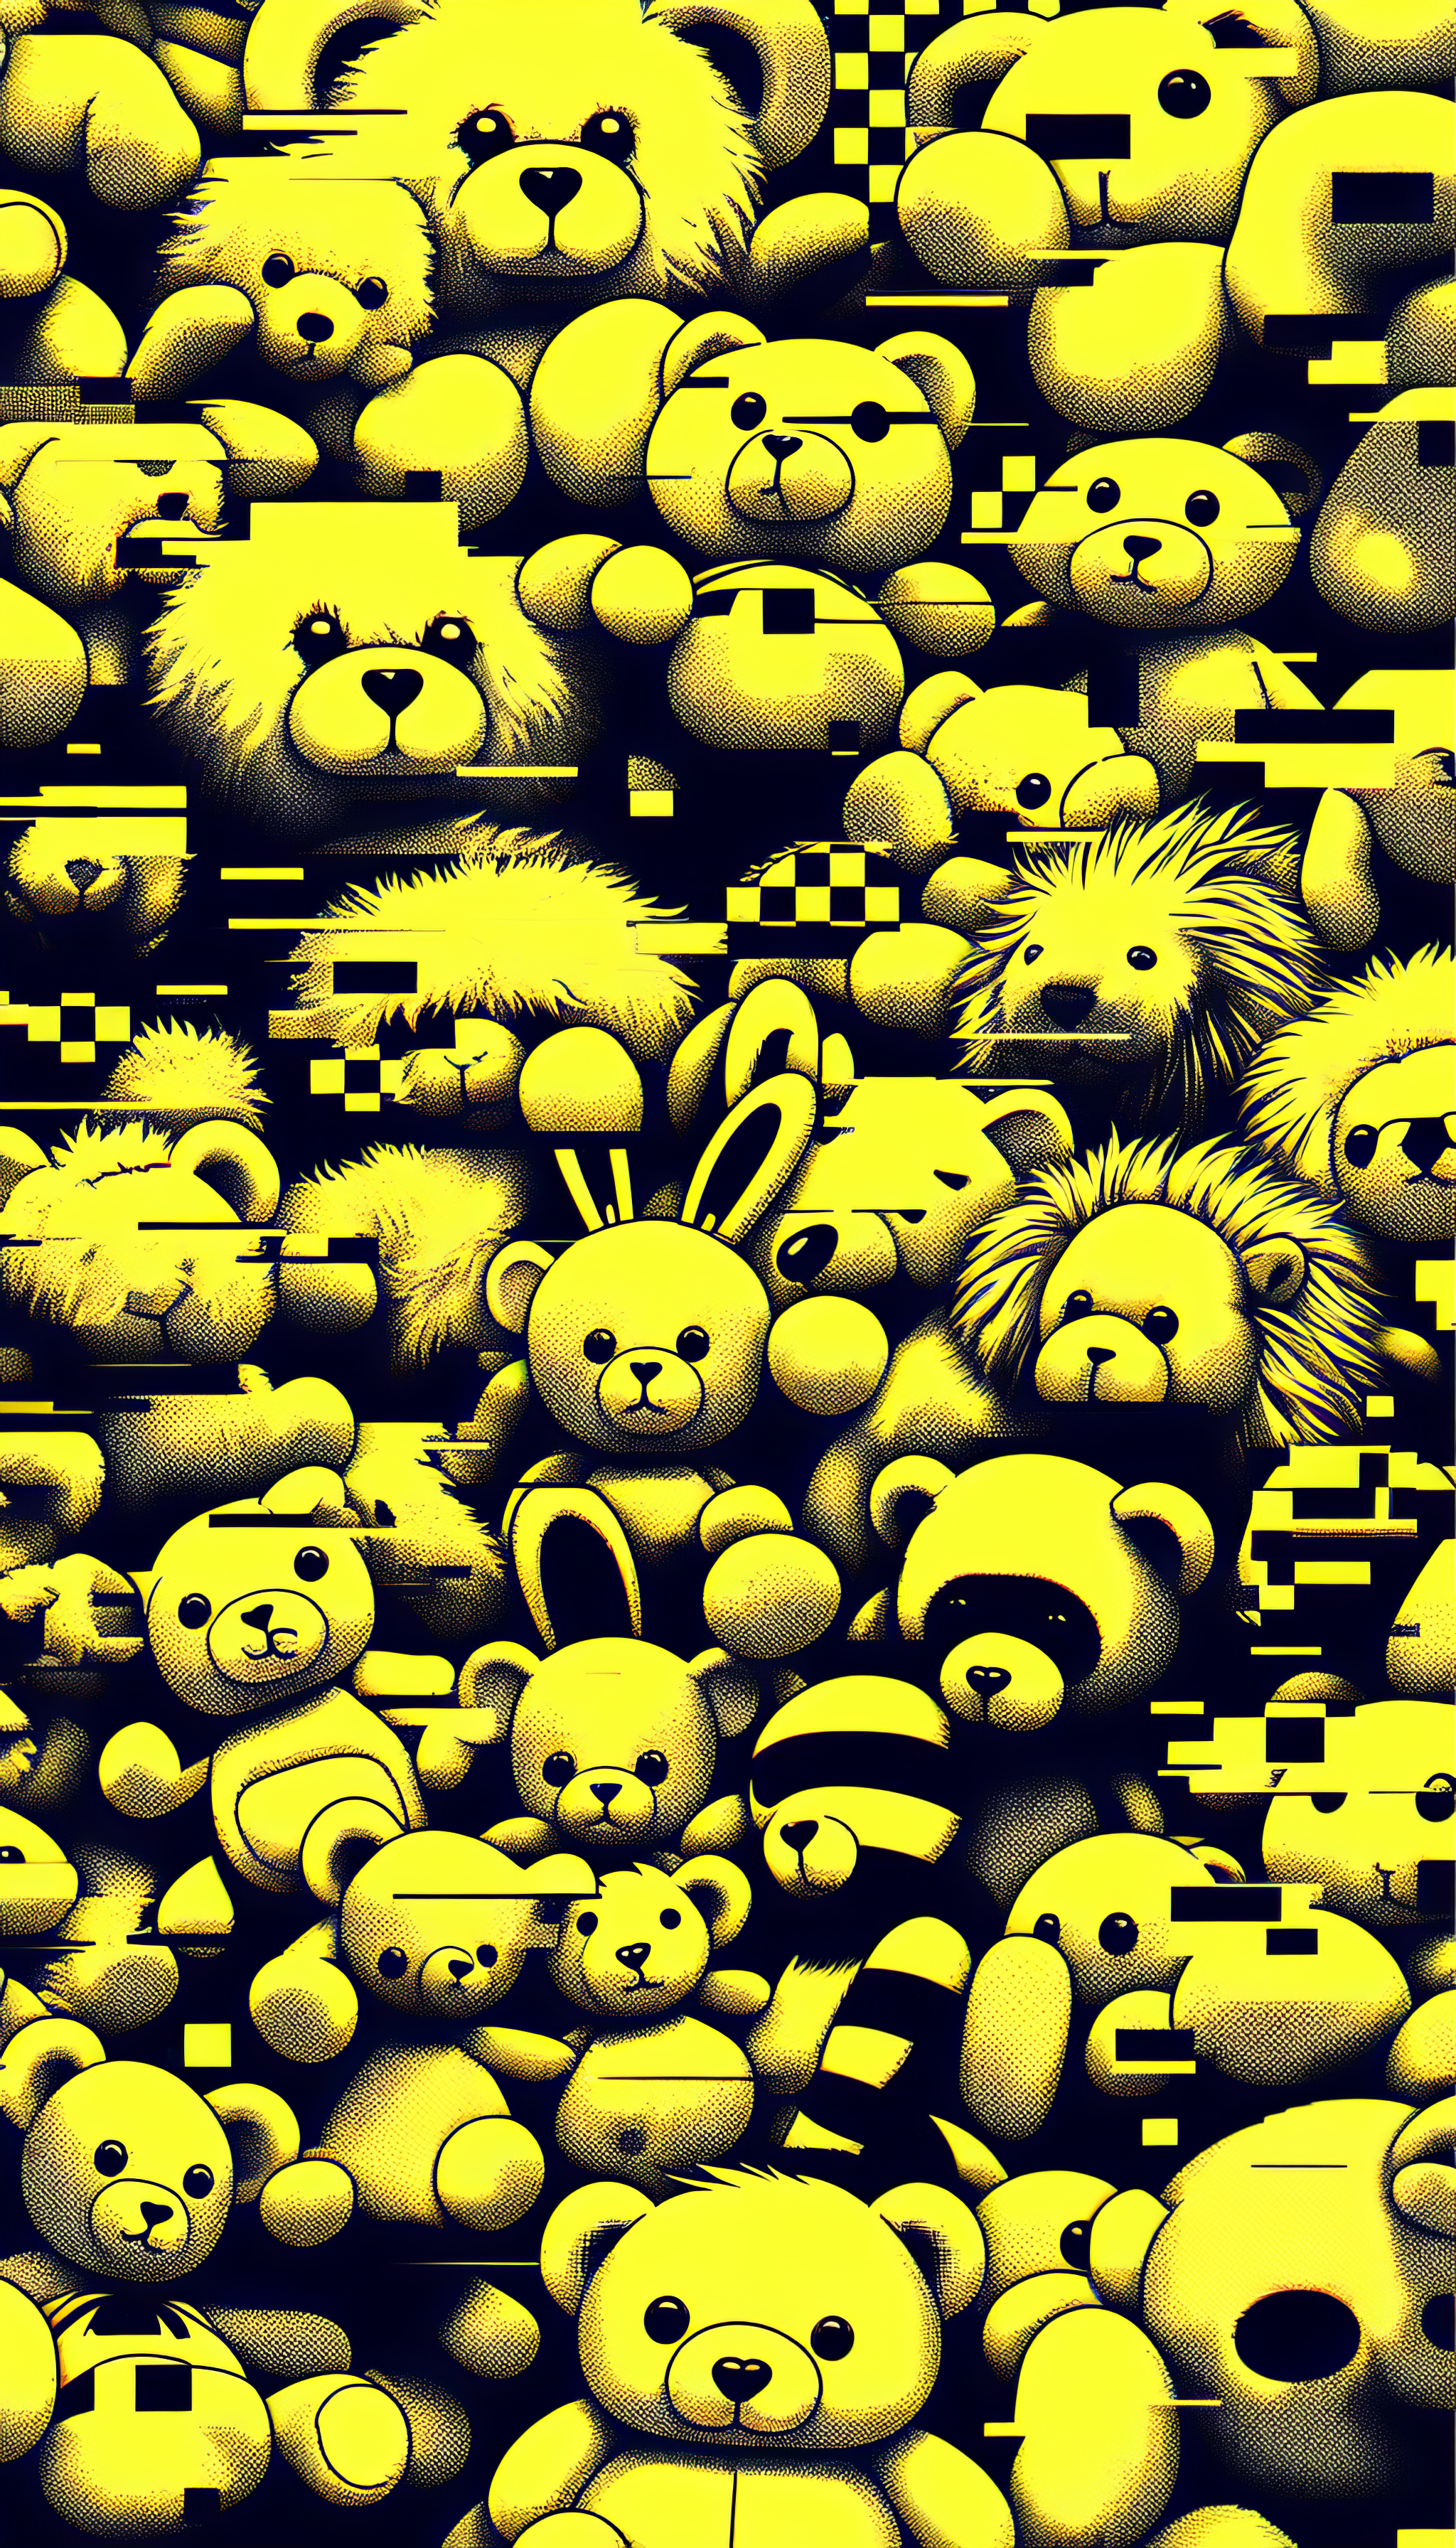 Trendy phone wallpaper featuring a variety of stuffed animal illustrations in a vibrant yellow color scheme, perfect for a playful and unique background.